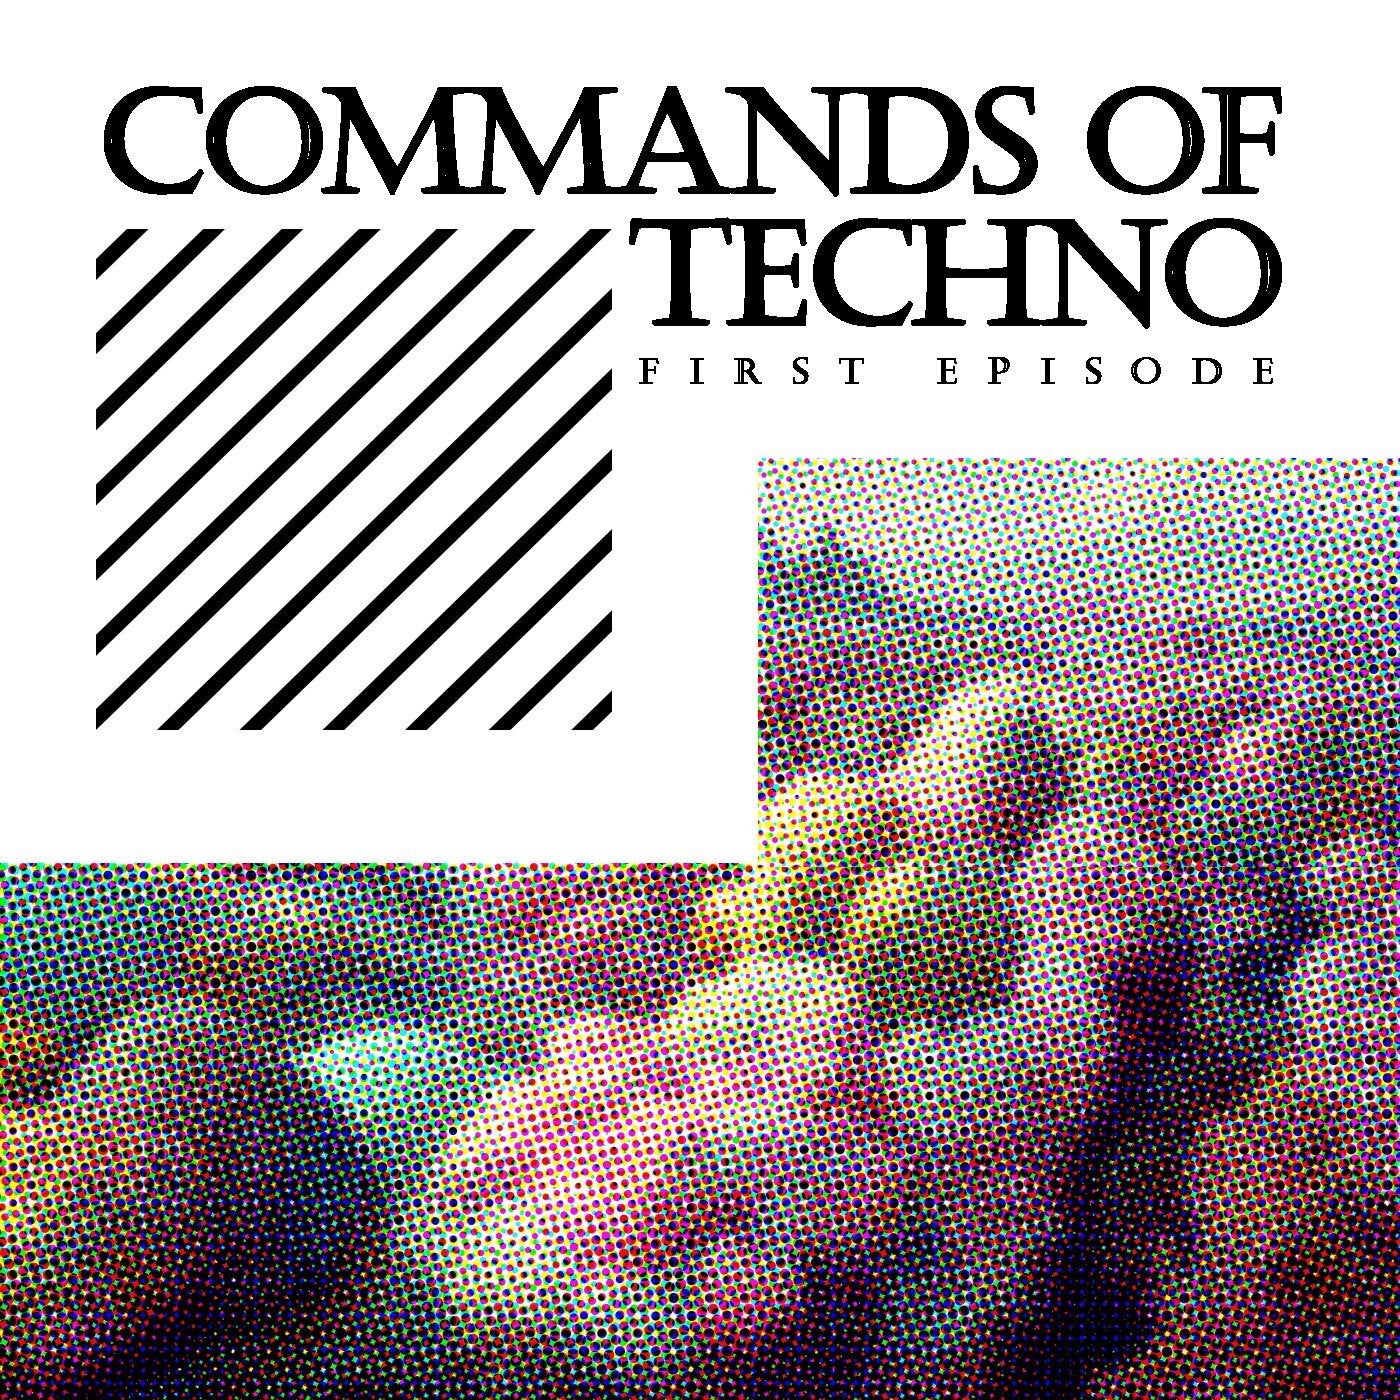 Commands Of Techno: First Episode